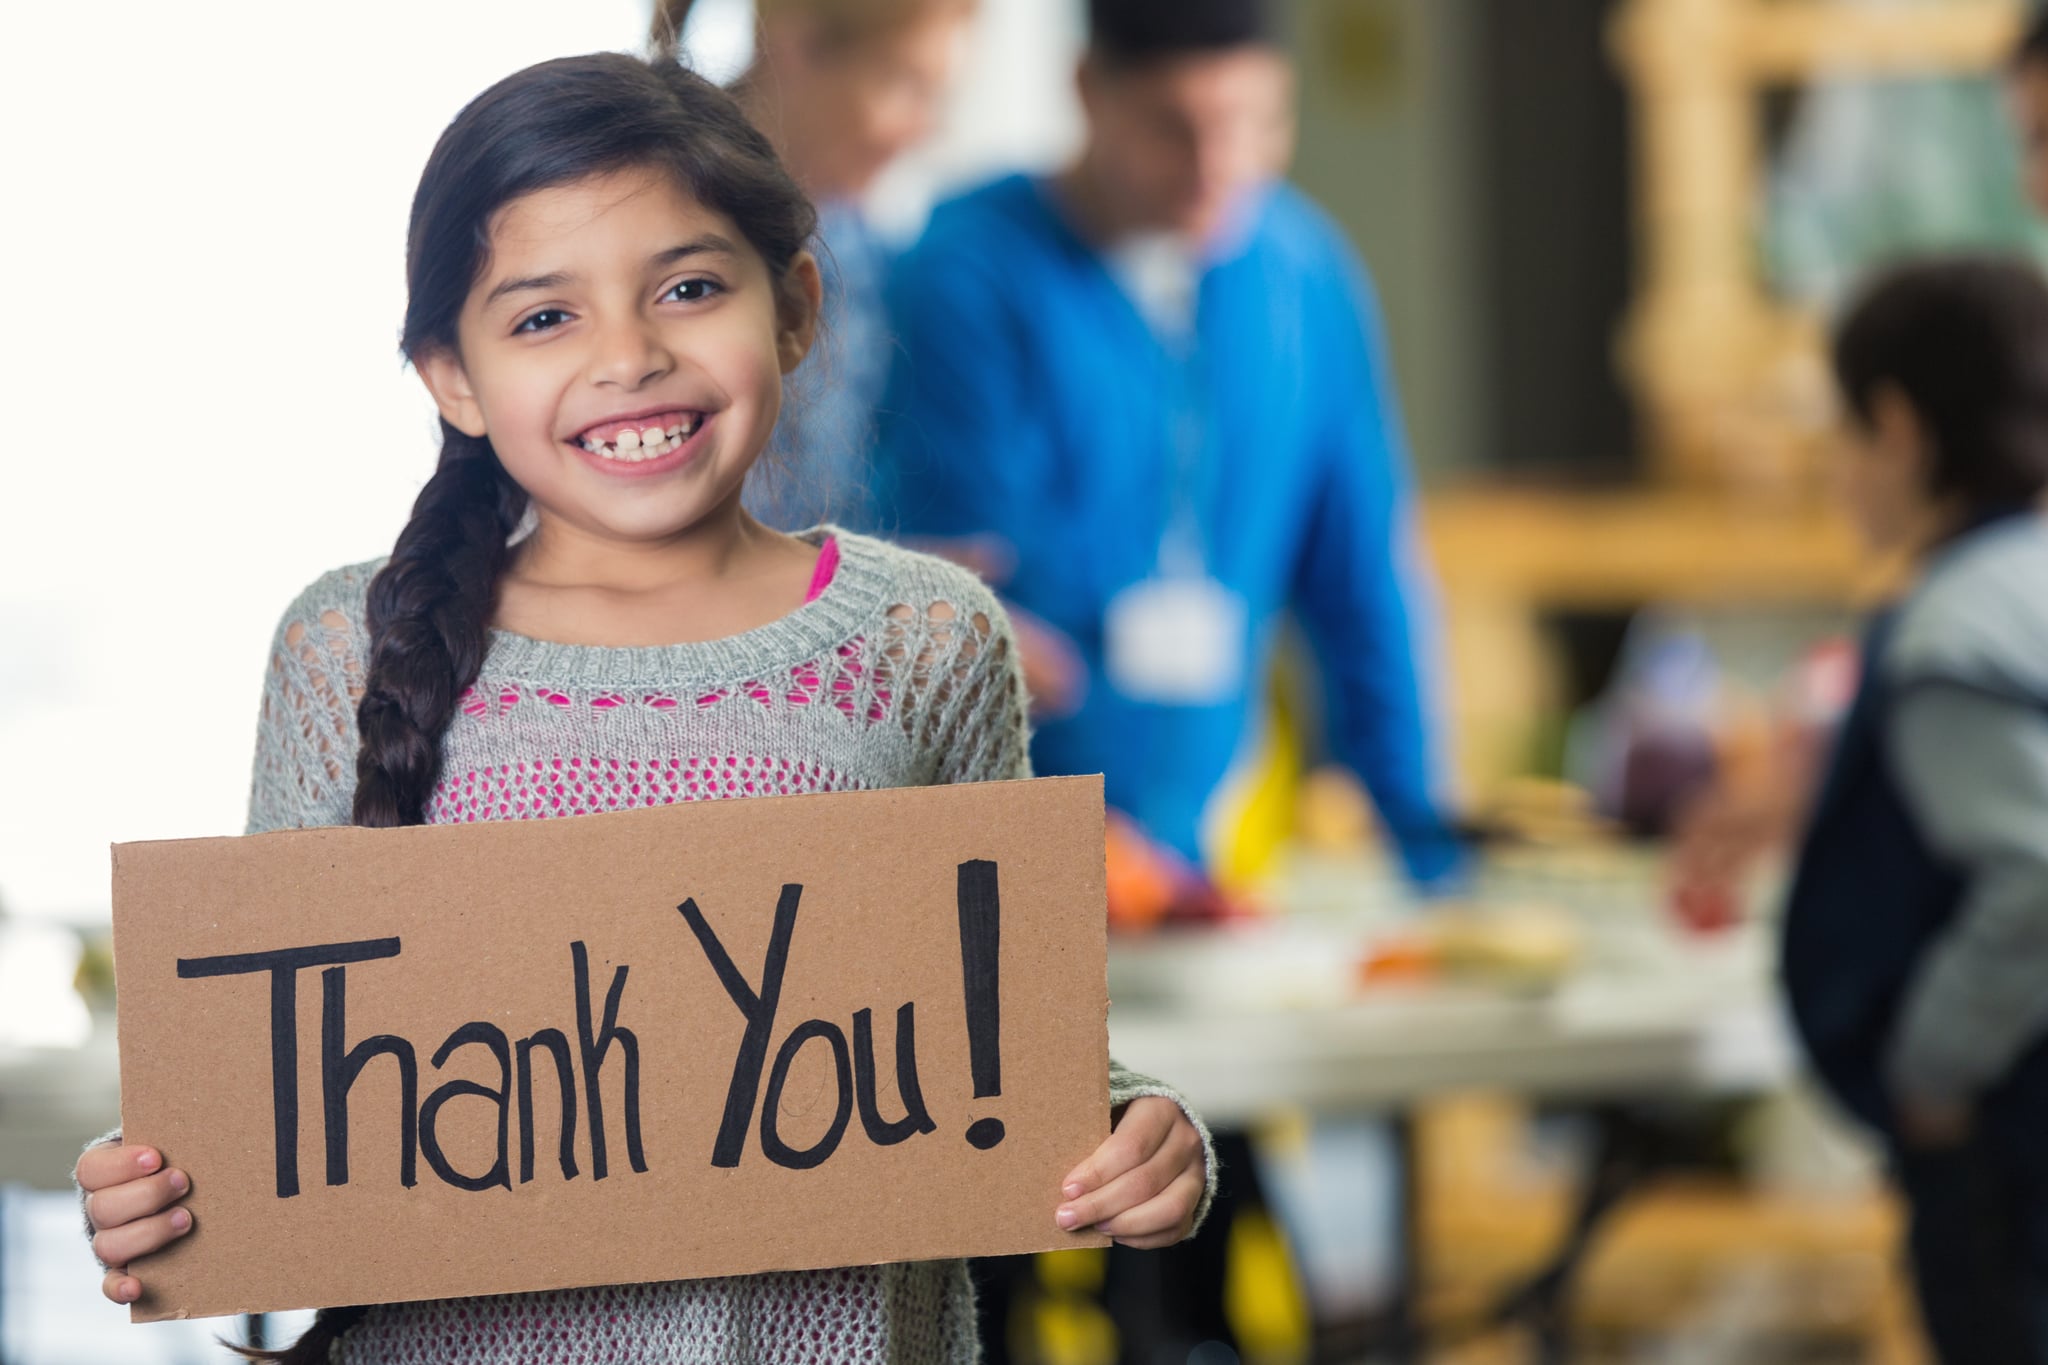 Cute Hispanic girl is holding a cardboard sign with 'Thank You!' witten on the board. She and her family are in a soup kitchen or food bank. She is smiling at the camera. Her brown hair is in a braid. Volunteers ar serving her family in the background. Focus is on the girl and the sign.